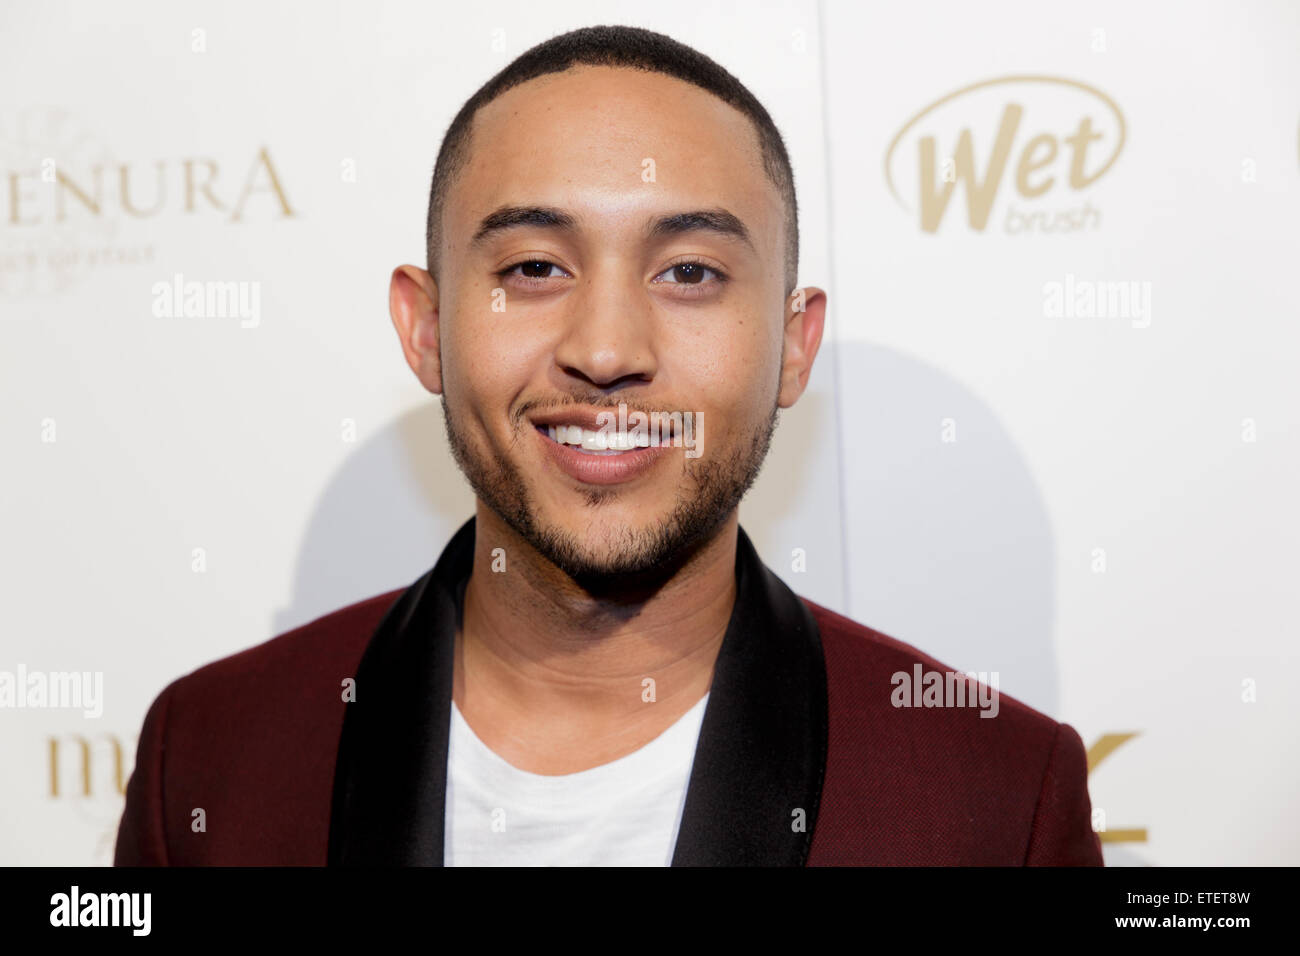 OK! Magazine pre-Grammy party at Lure Nightclub with a performance by Nico & Vinz  Featuring: Tahj Mowry Where: Hollywood, California, United States When: 05 Feb 2015 Credit: WENN.com Stock Photo